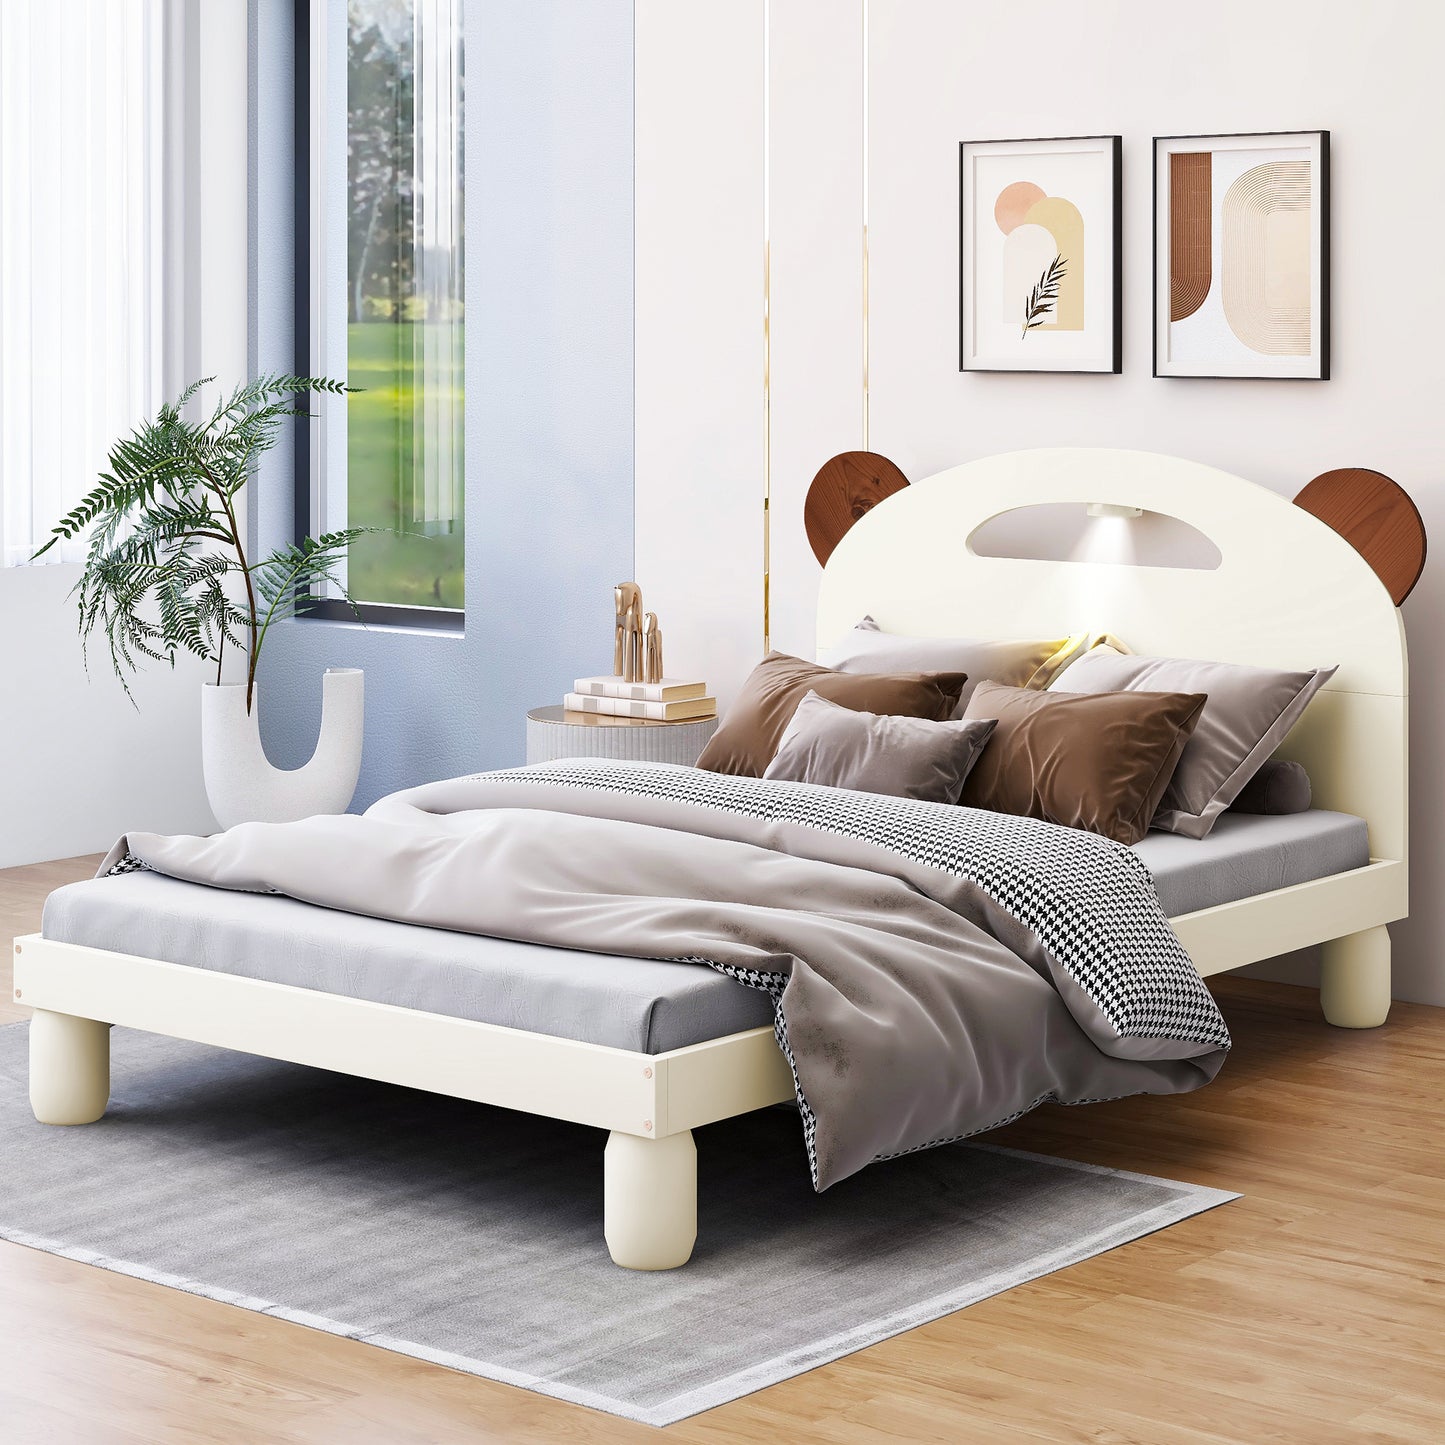 Twin Size Platform Bed with Bear Ears Shaped Headboard and LED, Cream White